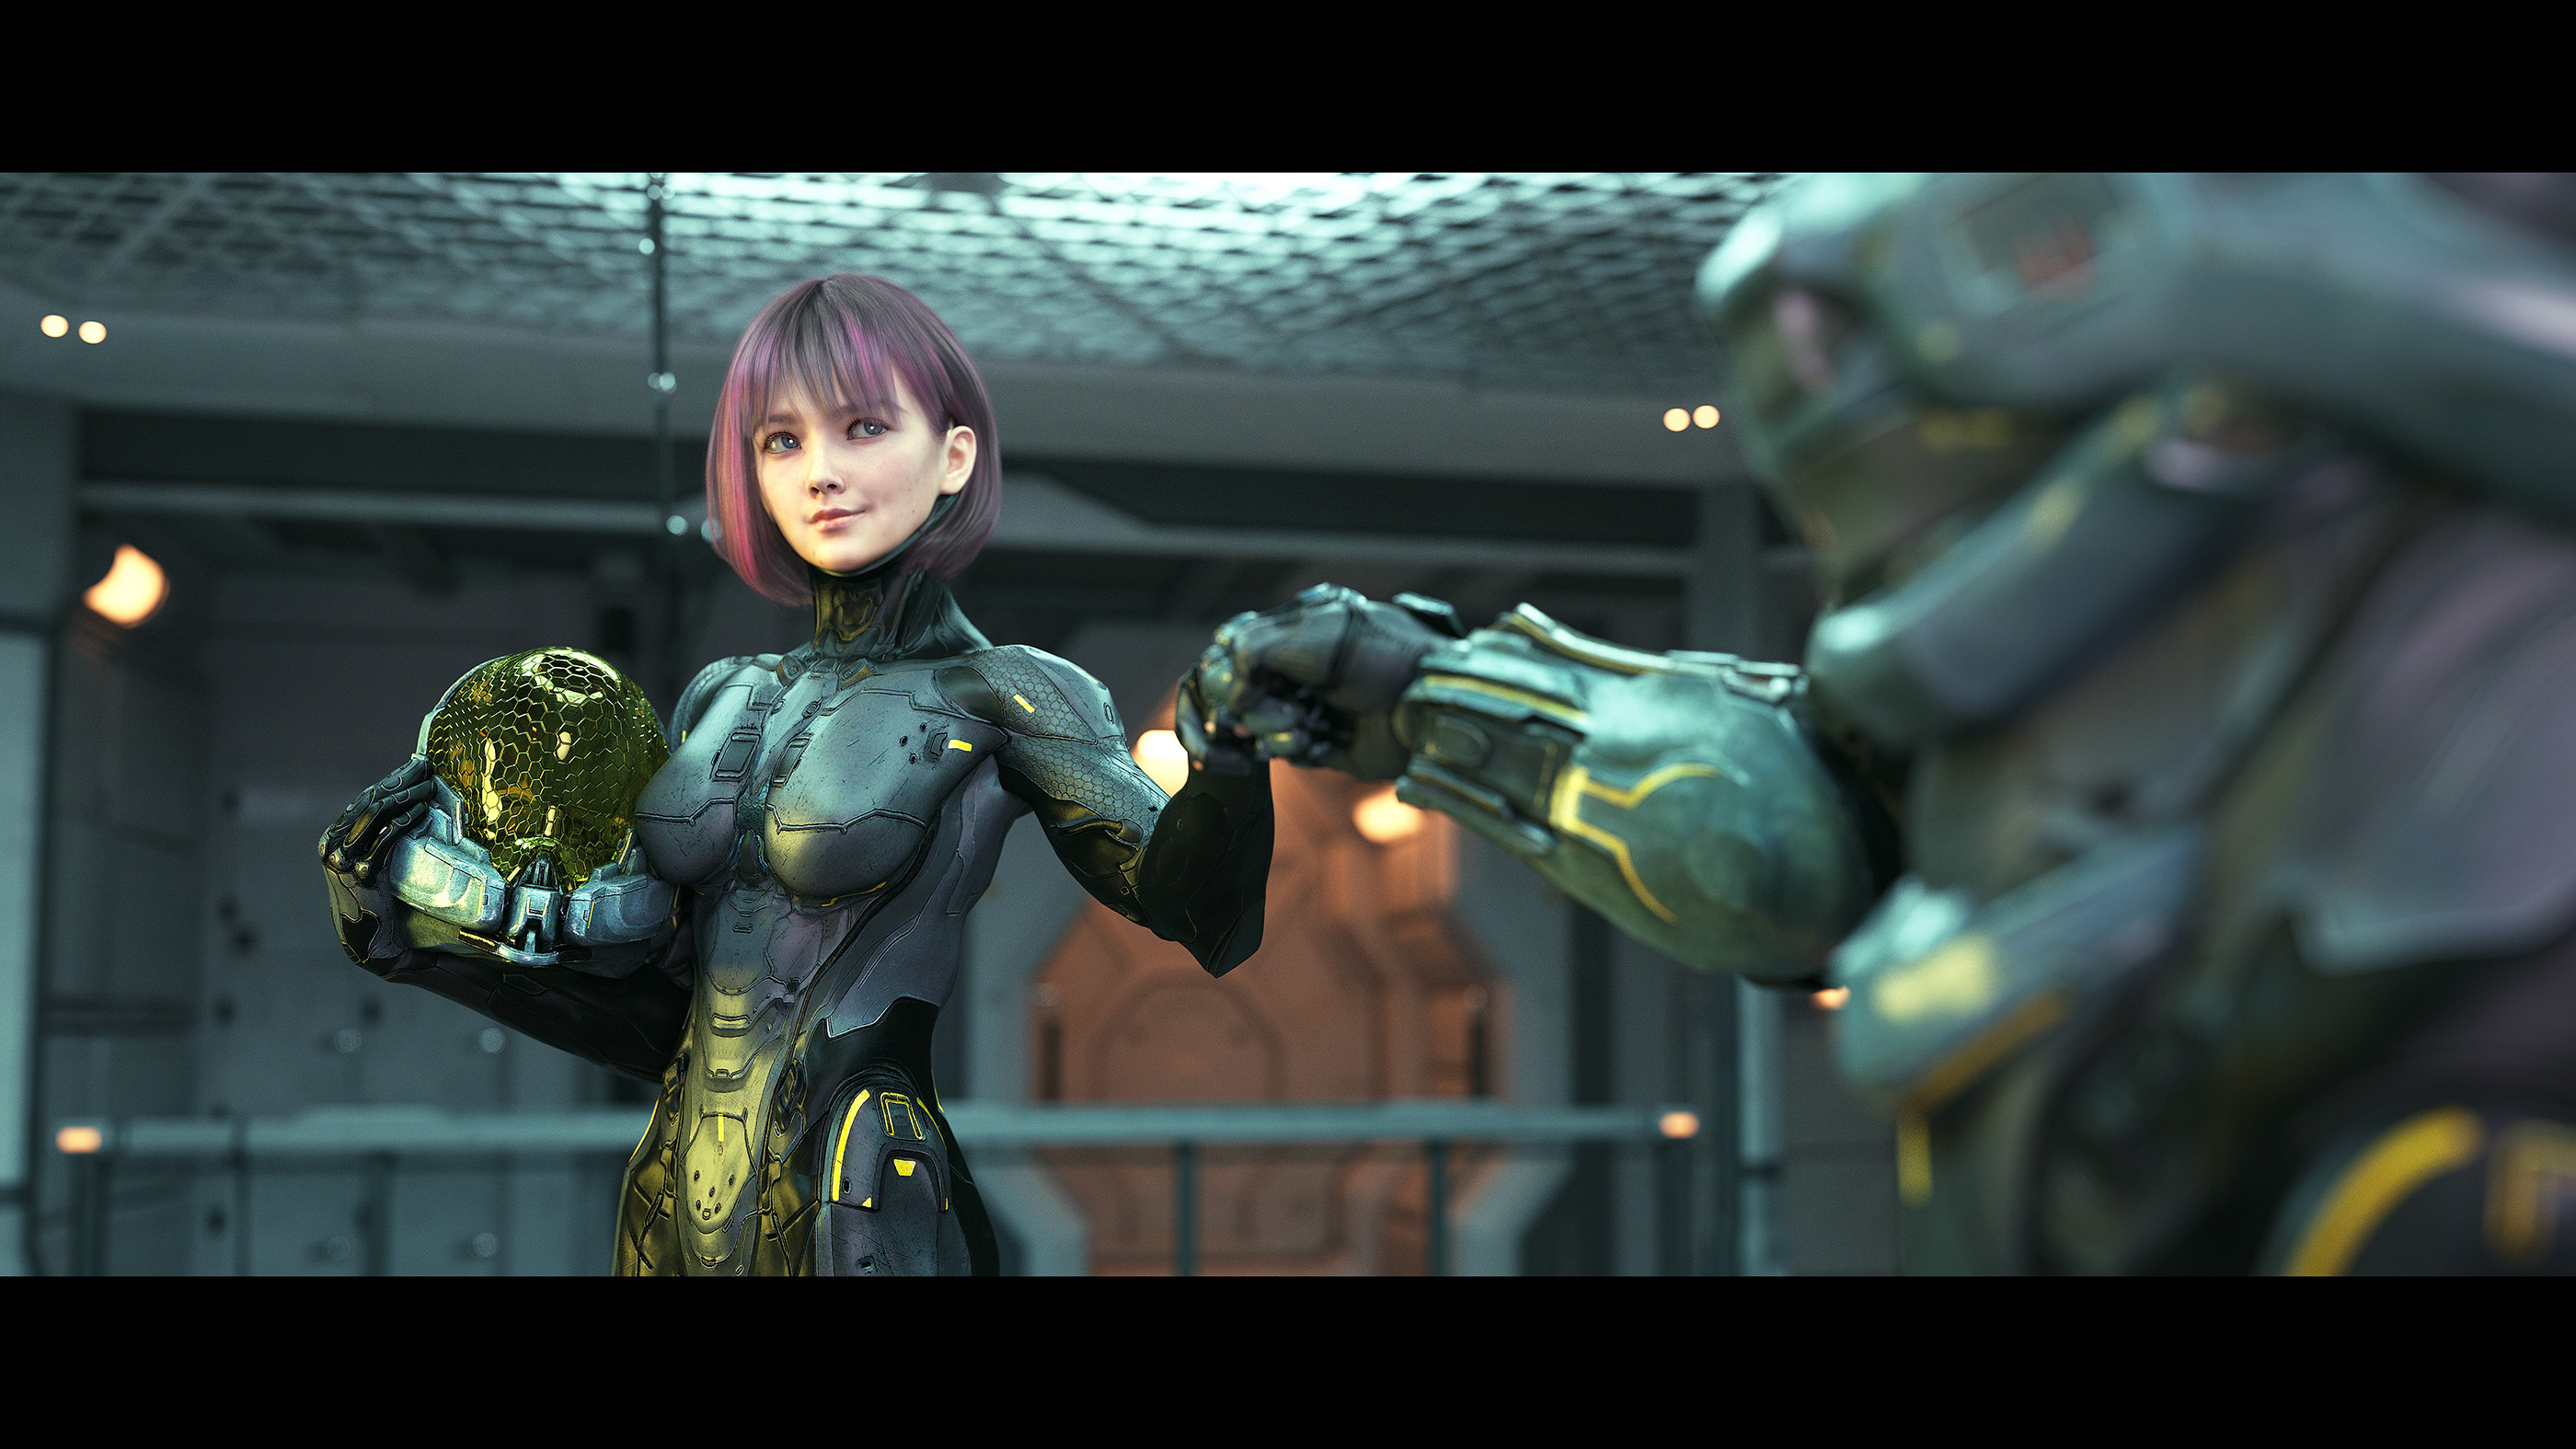 General 2800x1575 Lou LL science fiction spacesuit original characters purple hair Halo CE Master Chief (Halo)